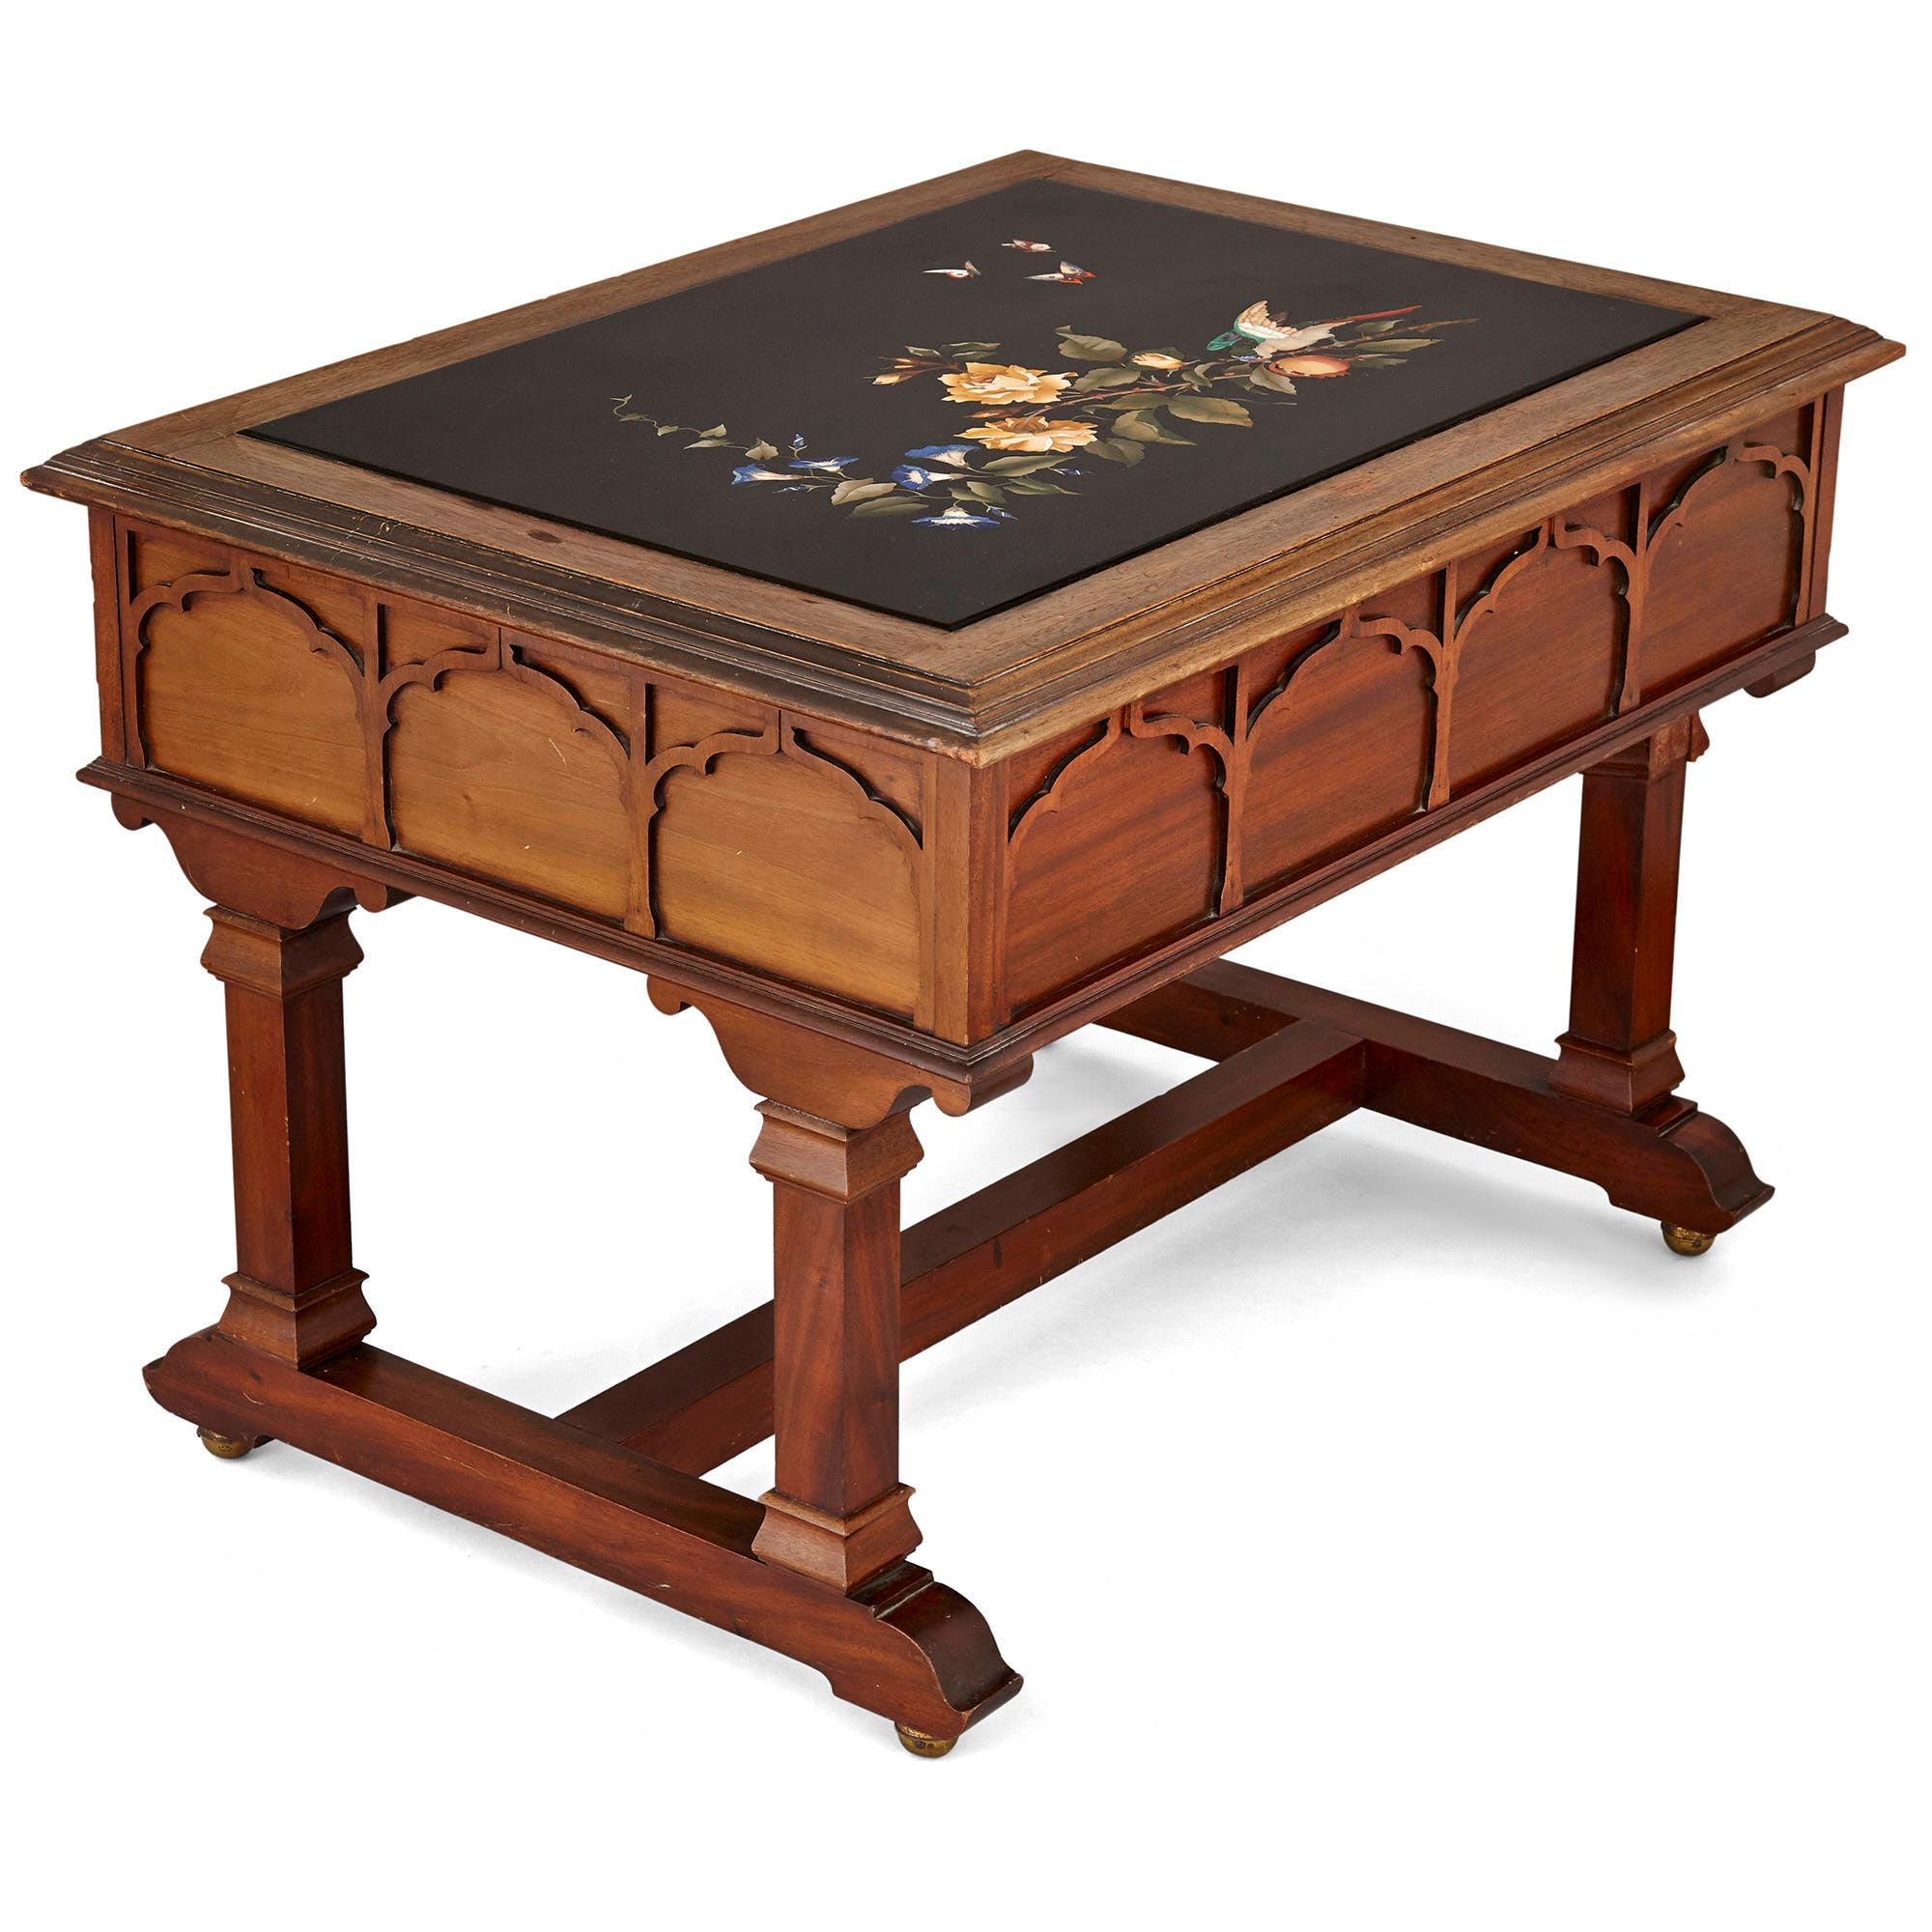 Pietra Dura inlay Italian coffee table
Italian, 19th century
Measures: Height 59cm, width 83cm, depth 63cm

This highly unusual coffee table is set with an exceptionally beautiful Pietra Dura top. The Pietra Dura panelled top has been expertly